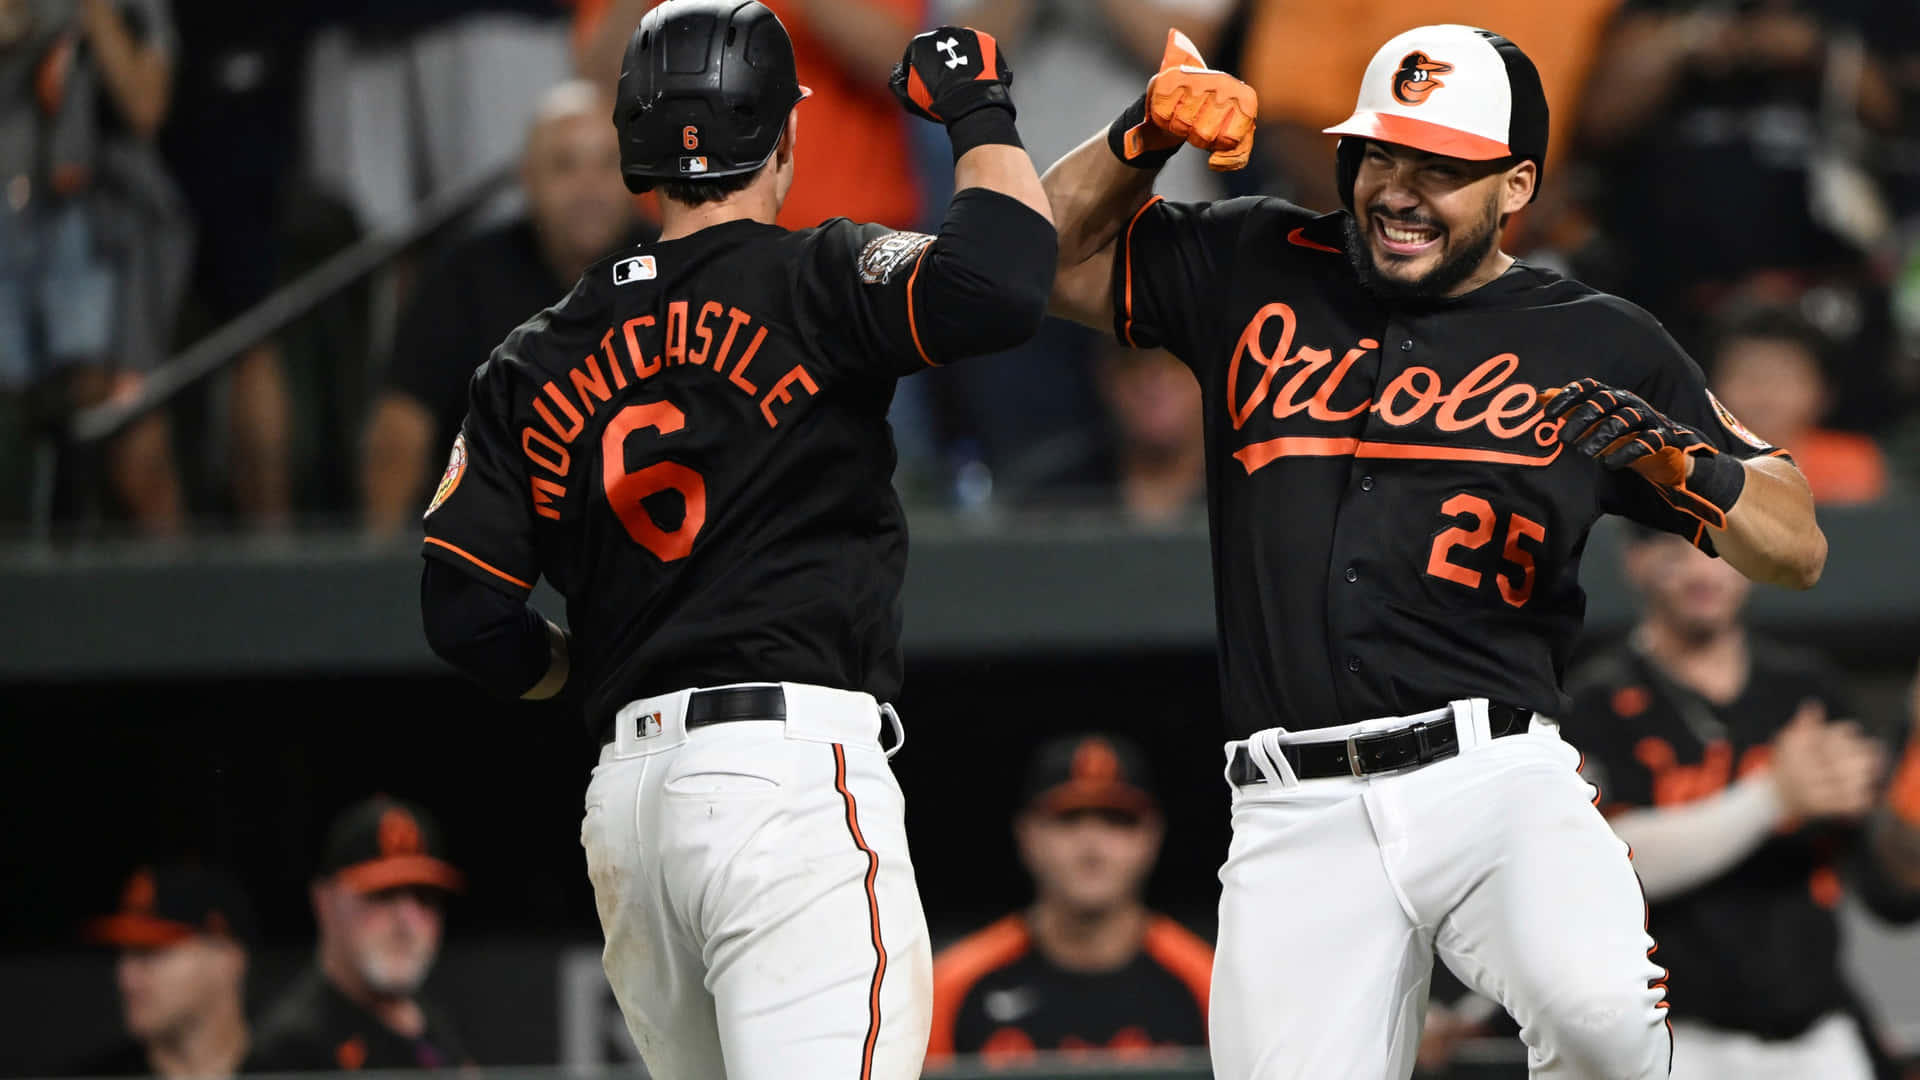 Orioles Players Celebrating Victory Wallpaper